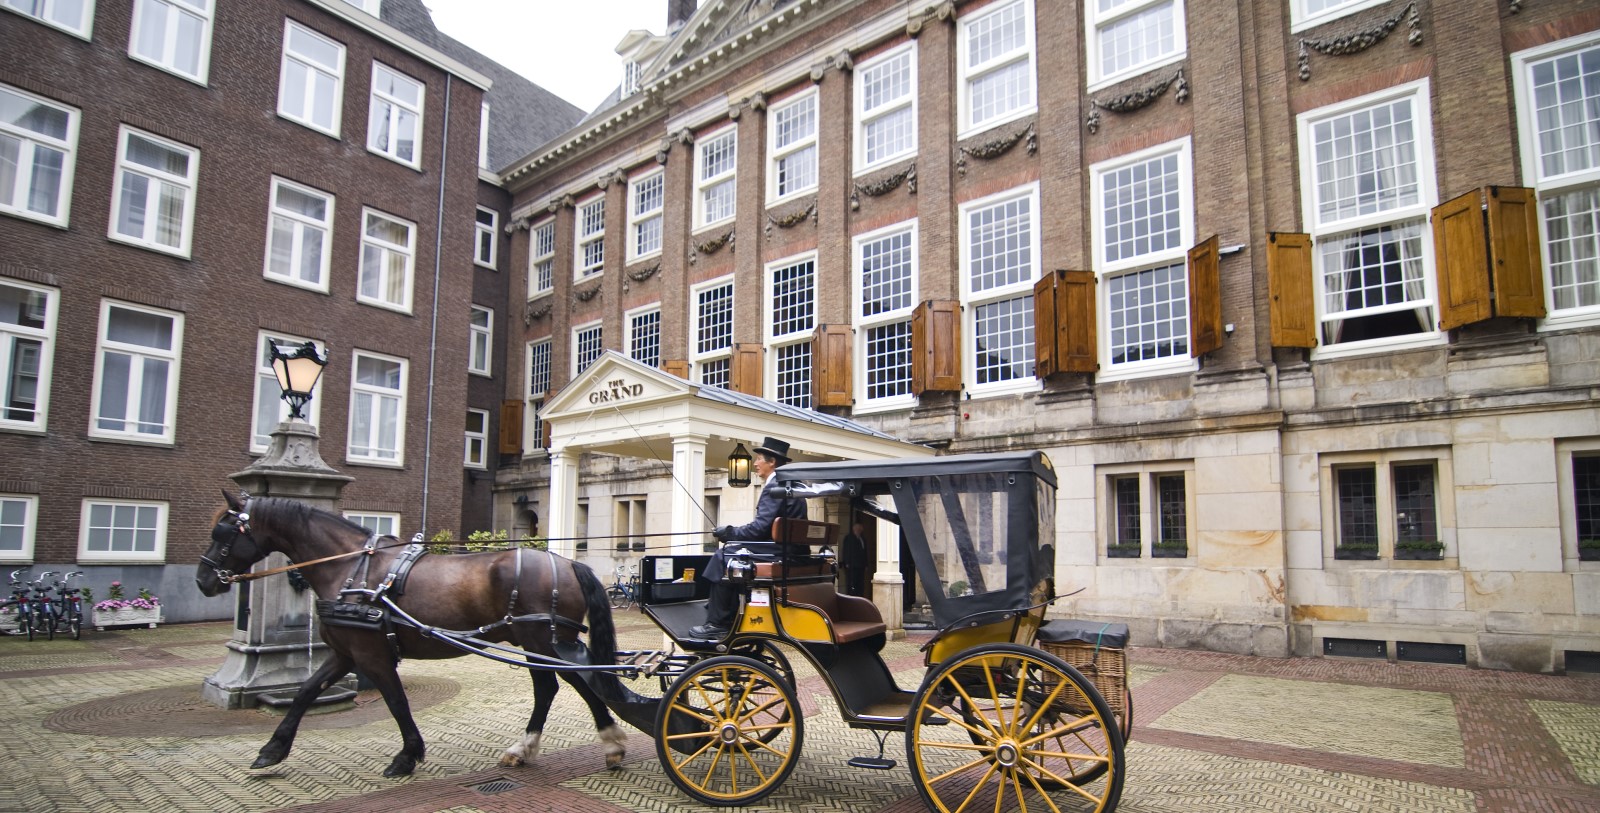 Explore the Royal Palace Amsterdam and the De Nieuwe Kerk just moments away.